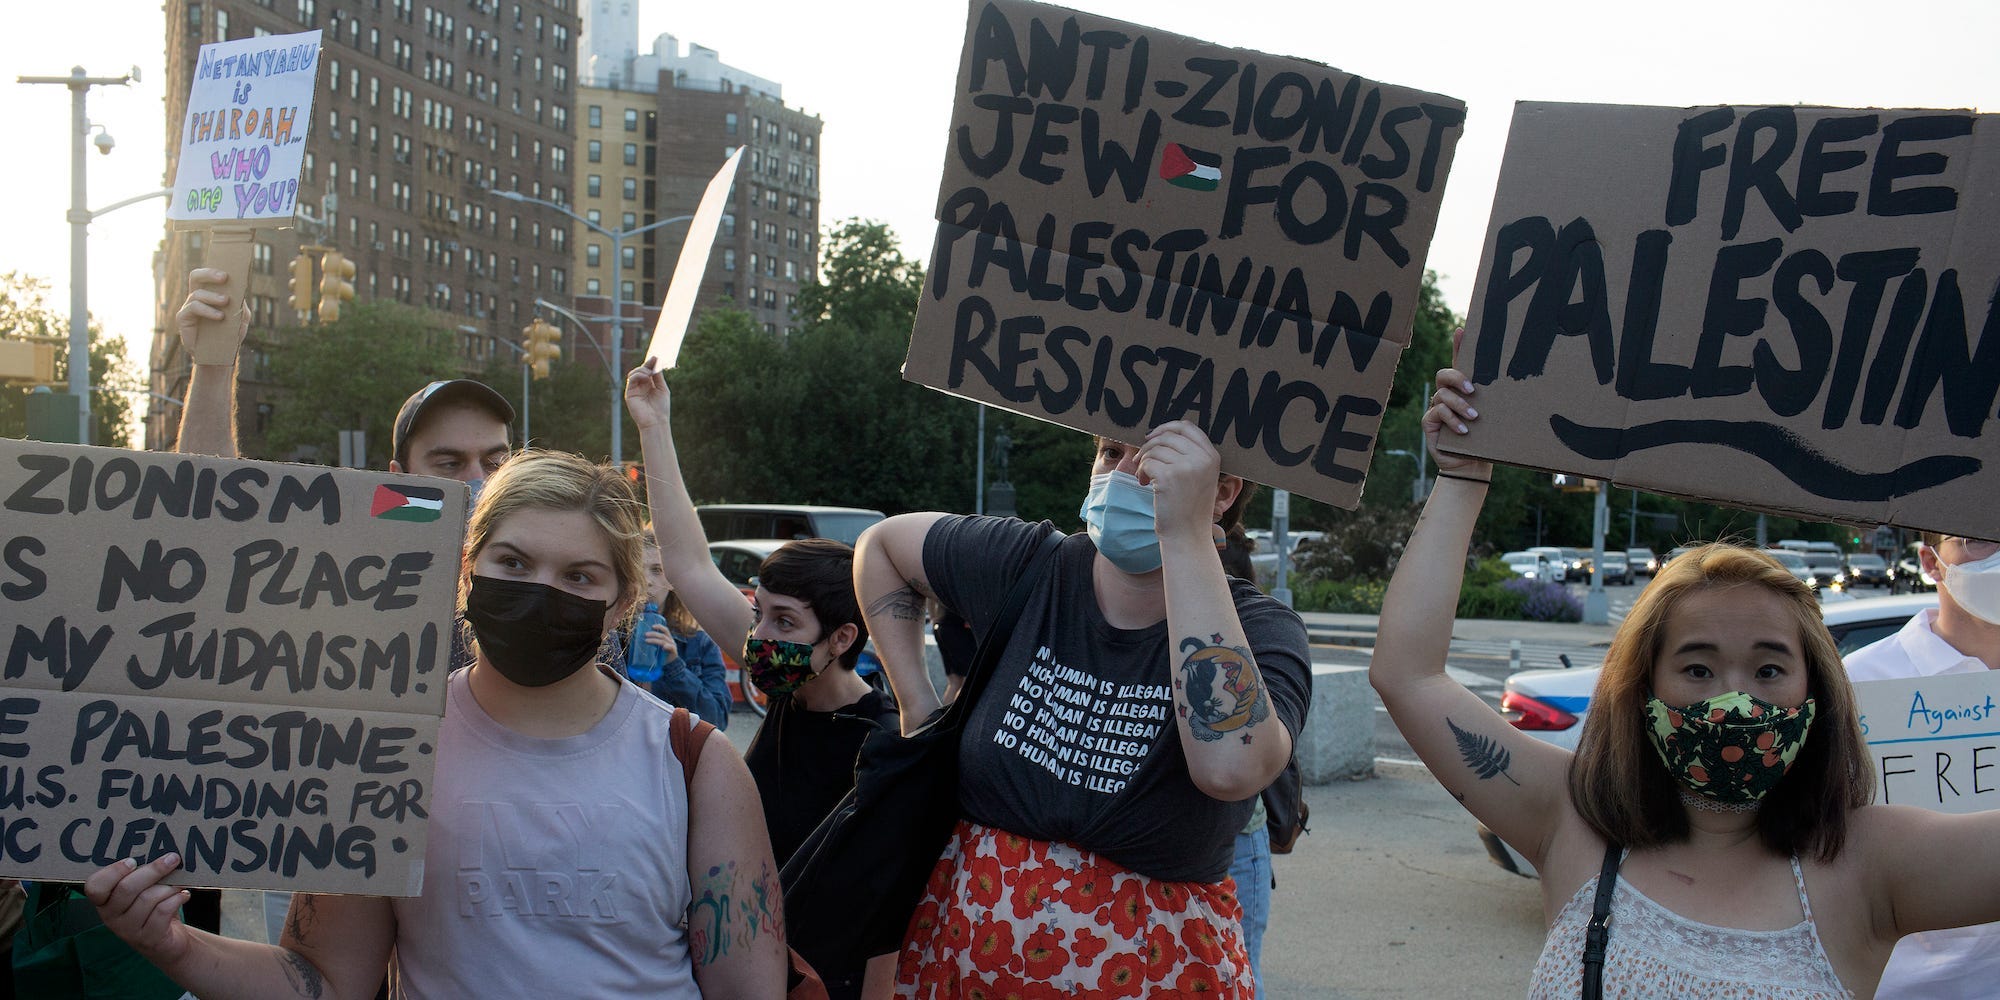 Progressive members of Brooklyn's Jewish community hold a rally to protest Israel's continued occupation of Palestine and what they claim to be its zionist policies of apartheid, May 21, 2021 in the Prospect Park neighborhood of Brooklyn, New York.